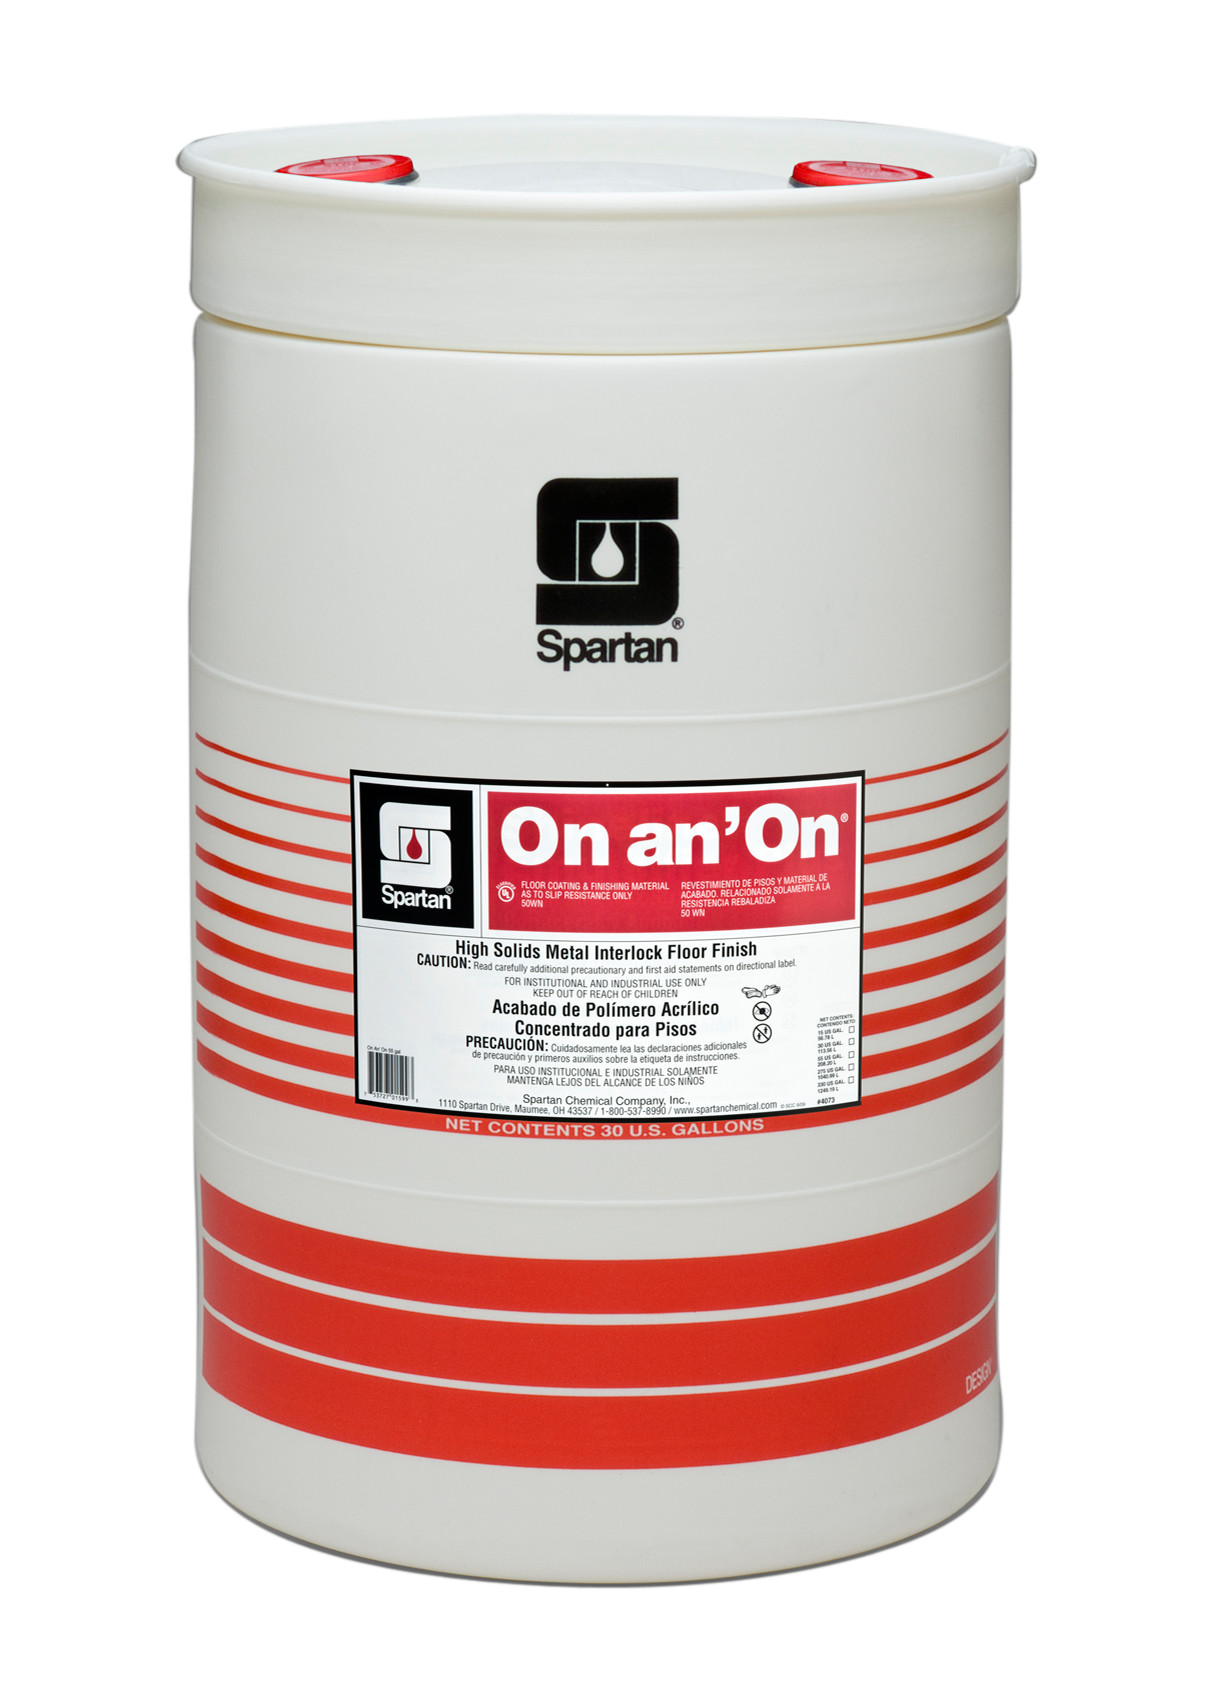 Spartan Chemical Company On an' On, 30 GAL DRUM